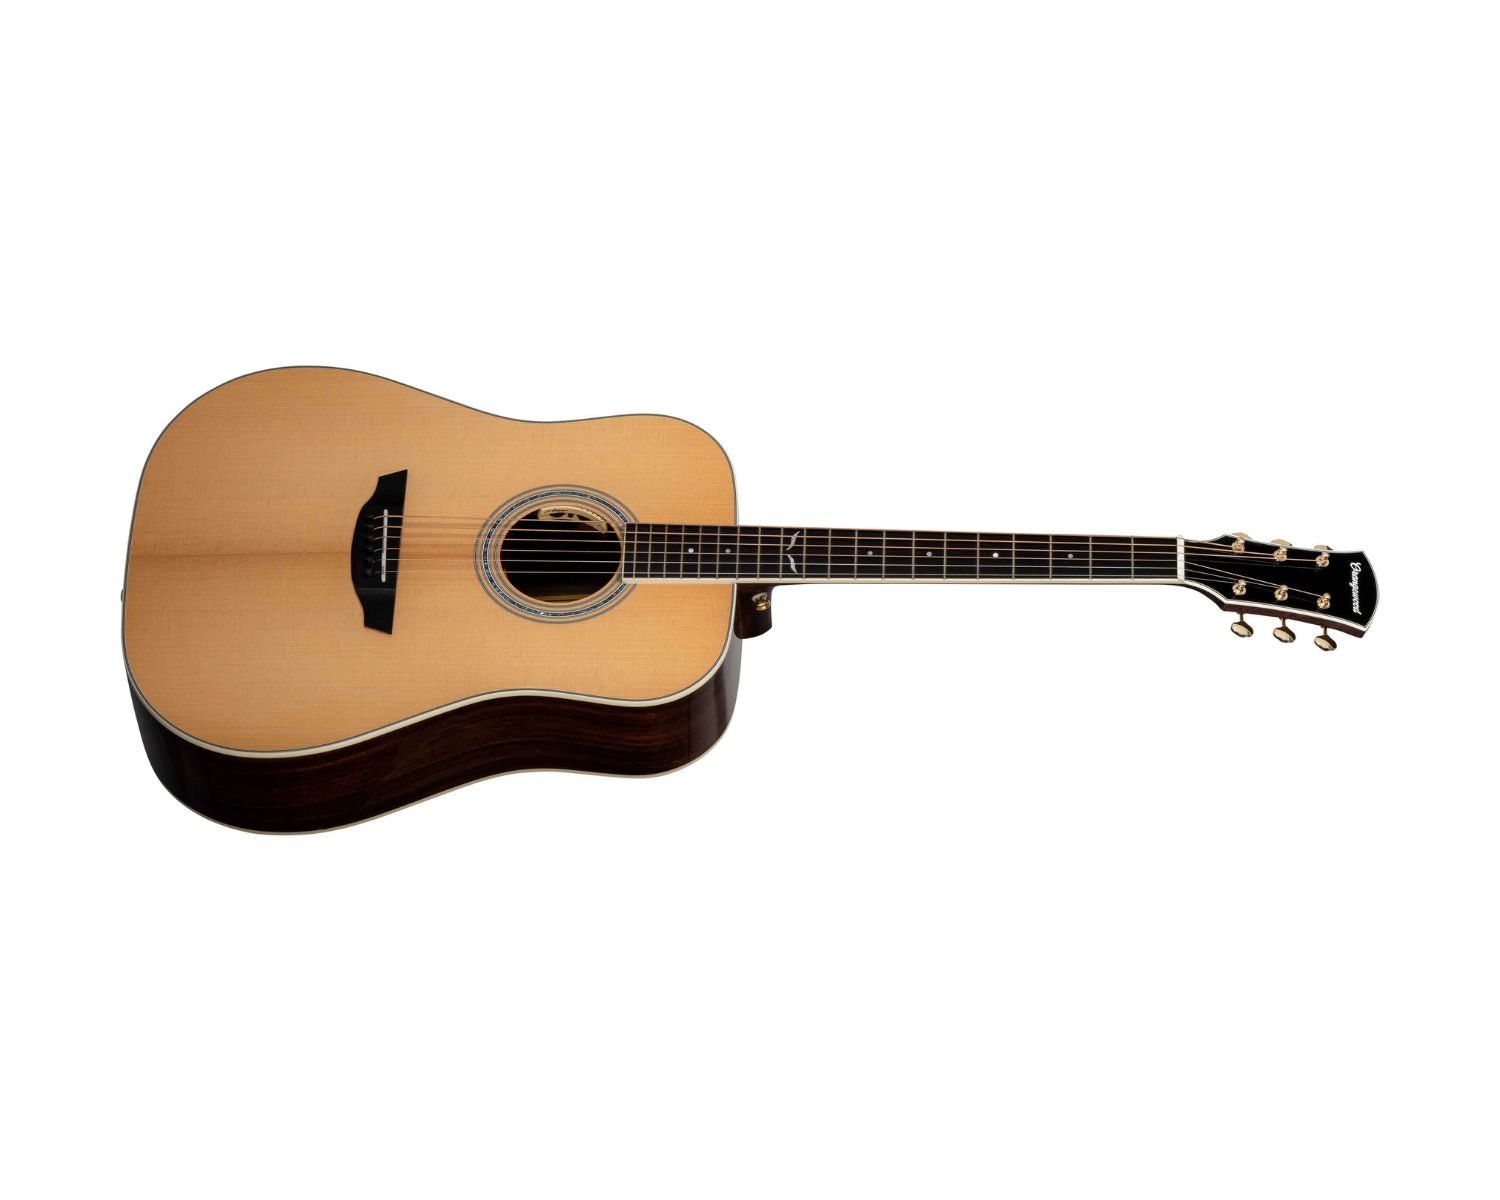 Acoustic Guitar Review: Unbiased Analysis and Recommendations